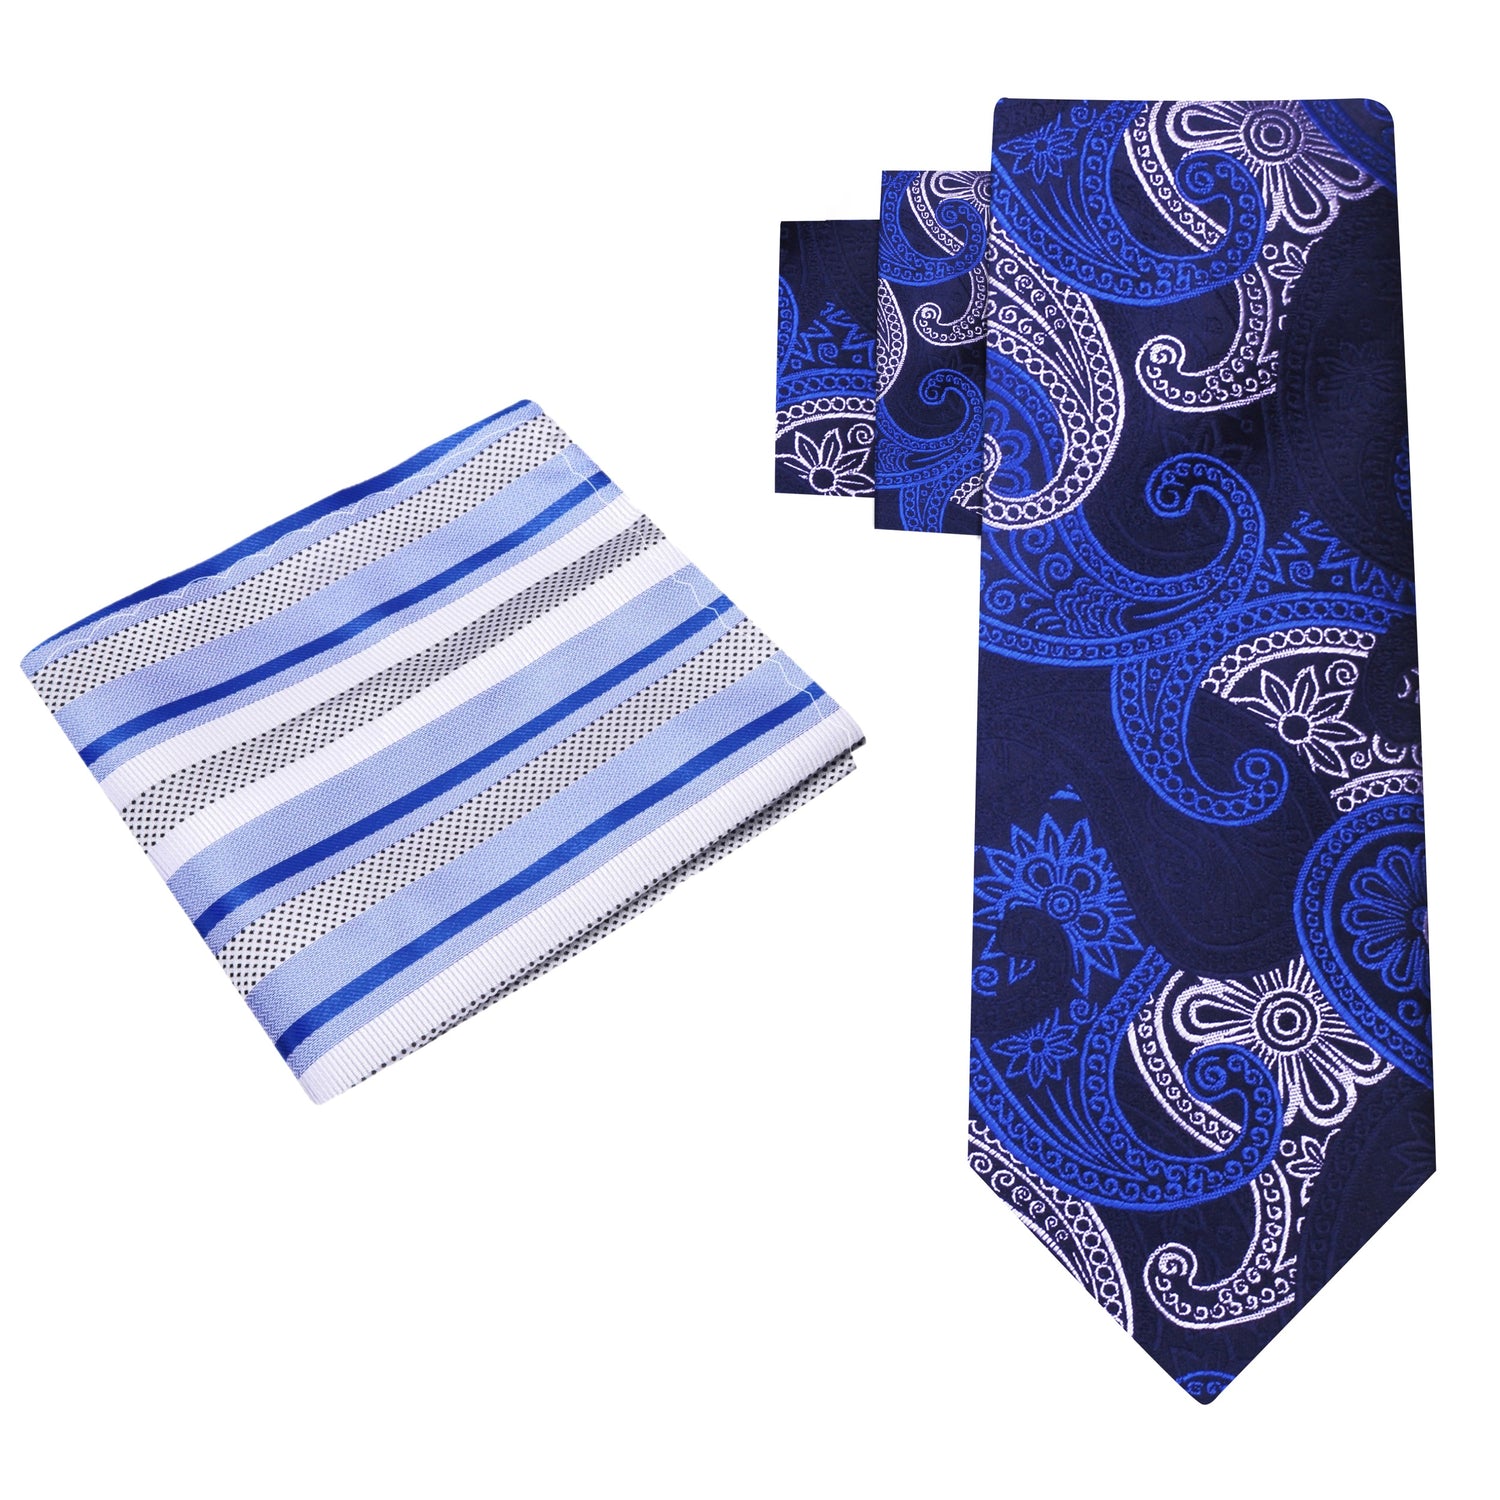 Alt View: Shades of Blue and White Paisley Necktie and White, Blue Stripe Square